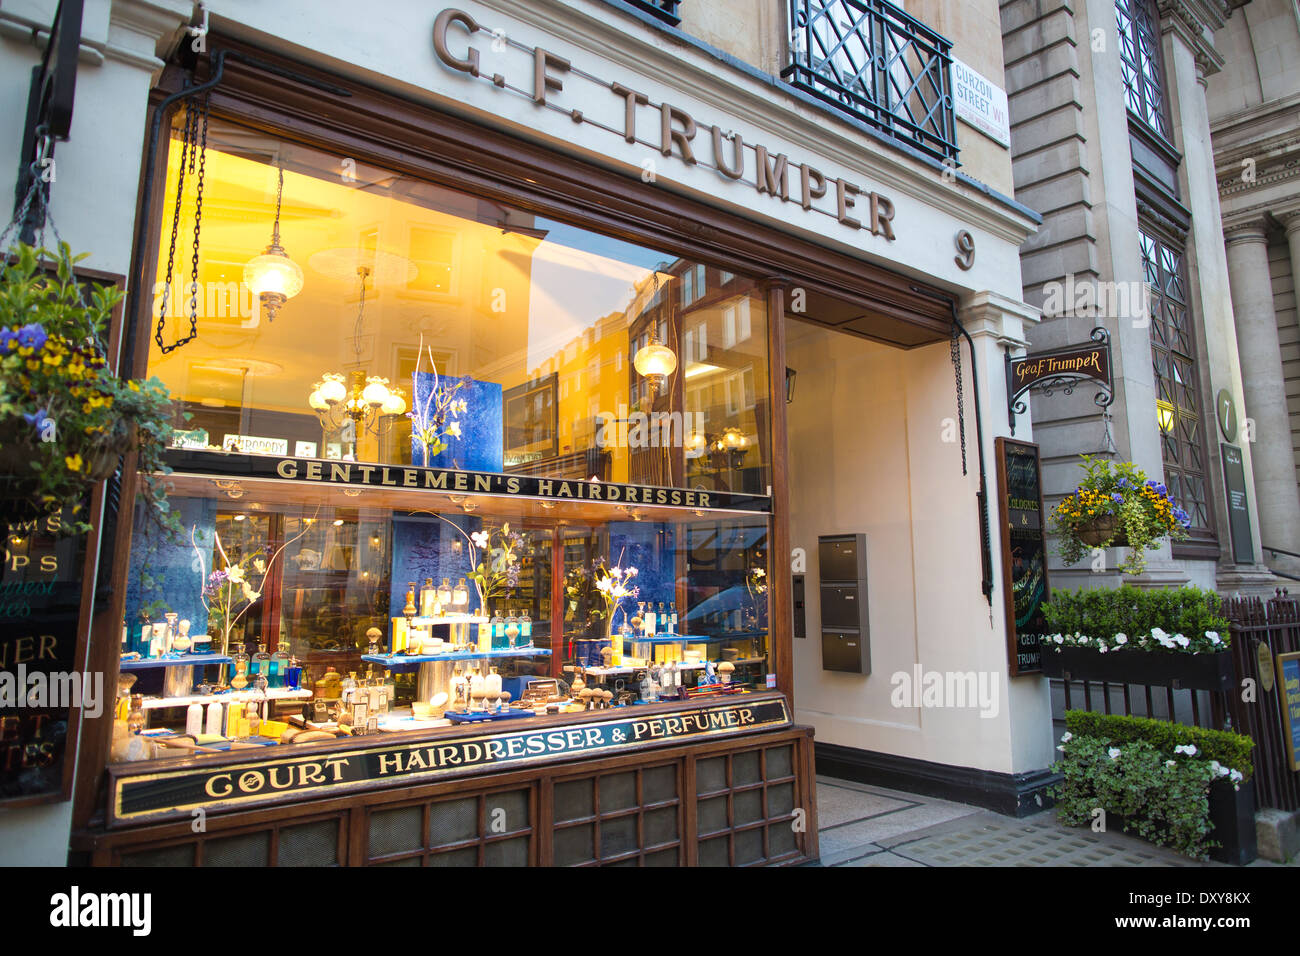 G.F. Trumper traditional barbers on Curzon Street, Mayfair, Central London, England, UK Stock Photo